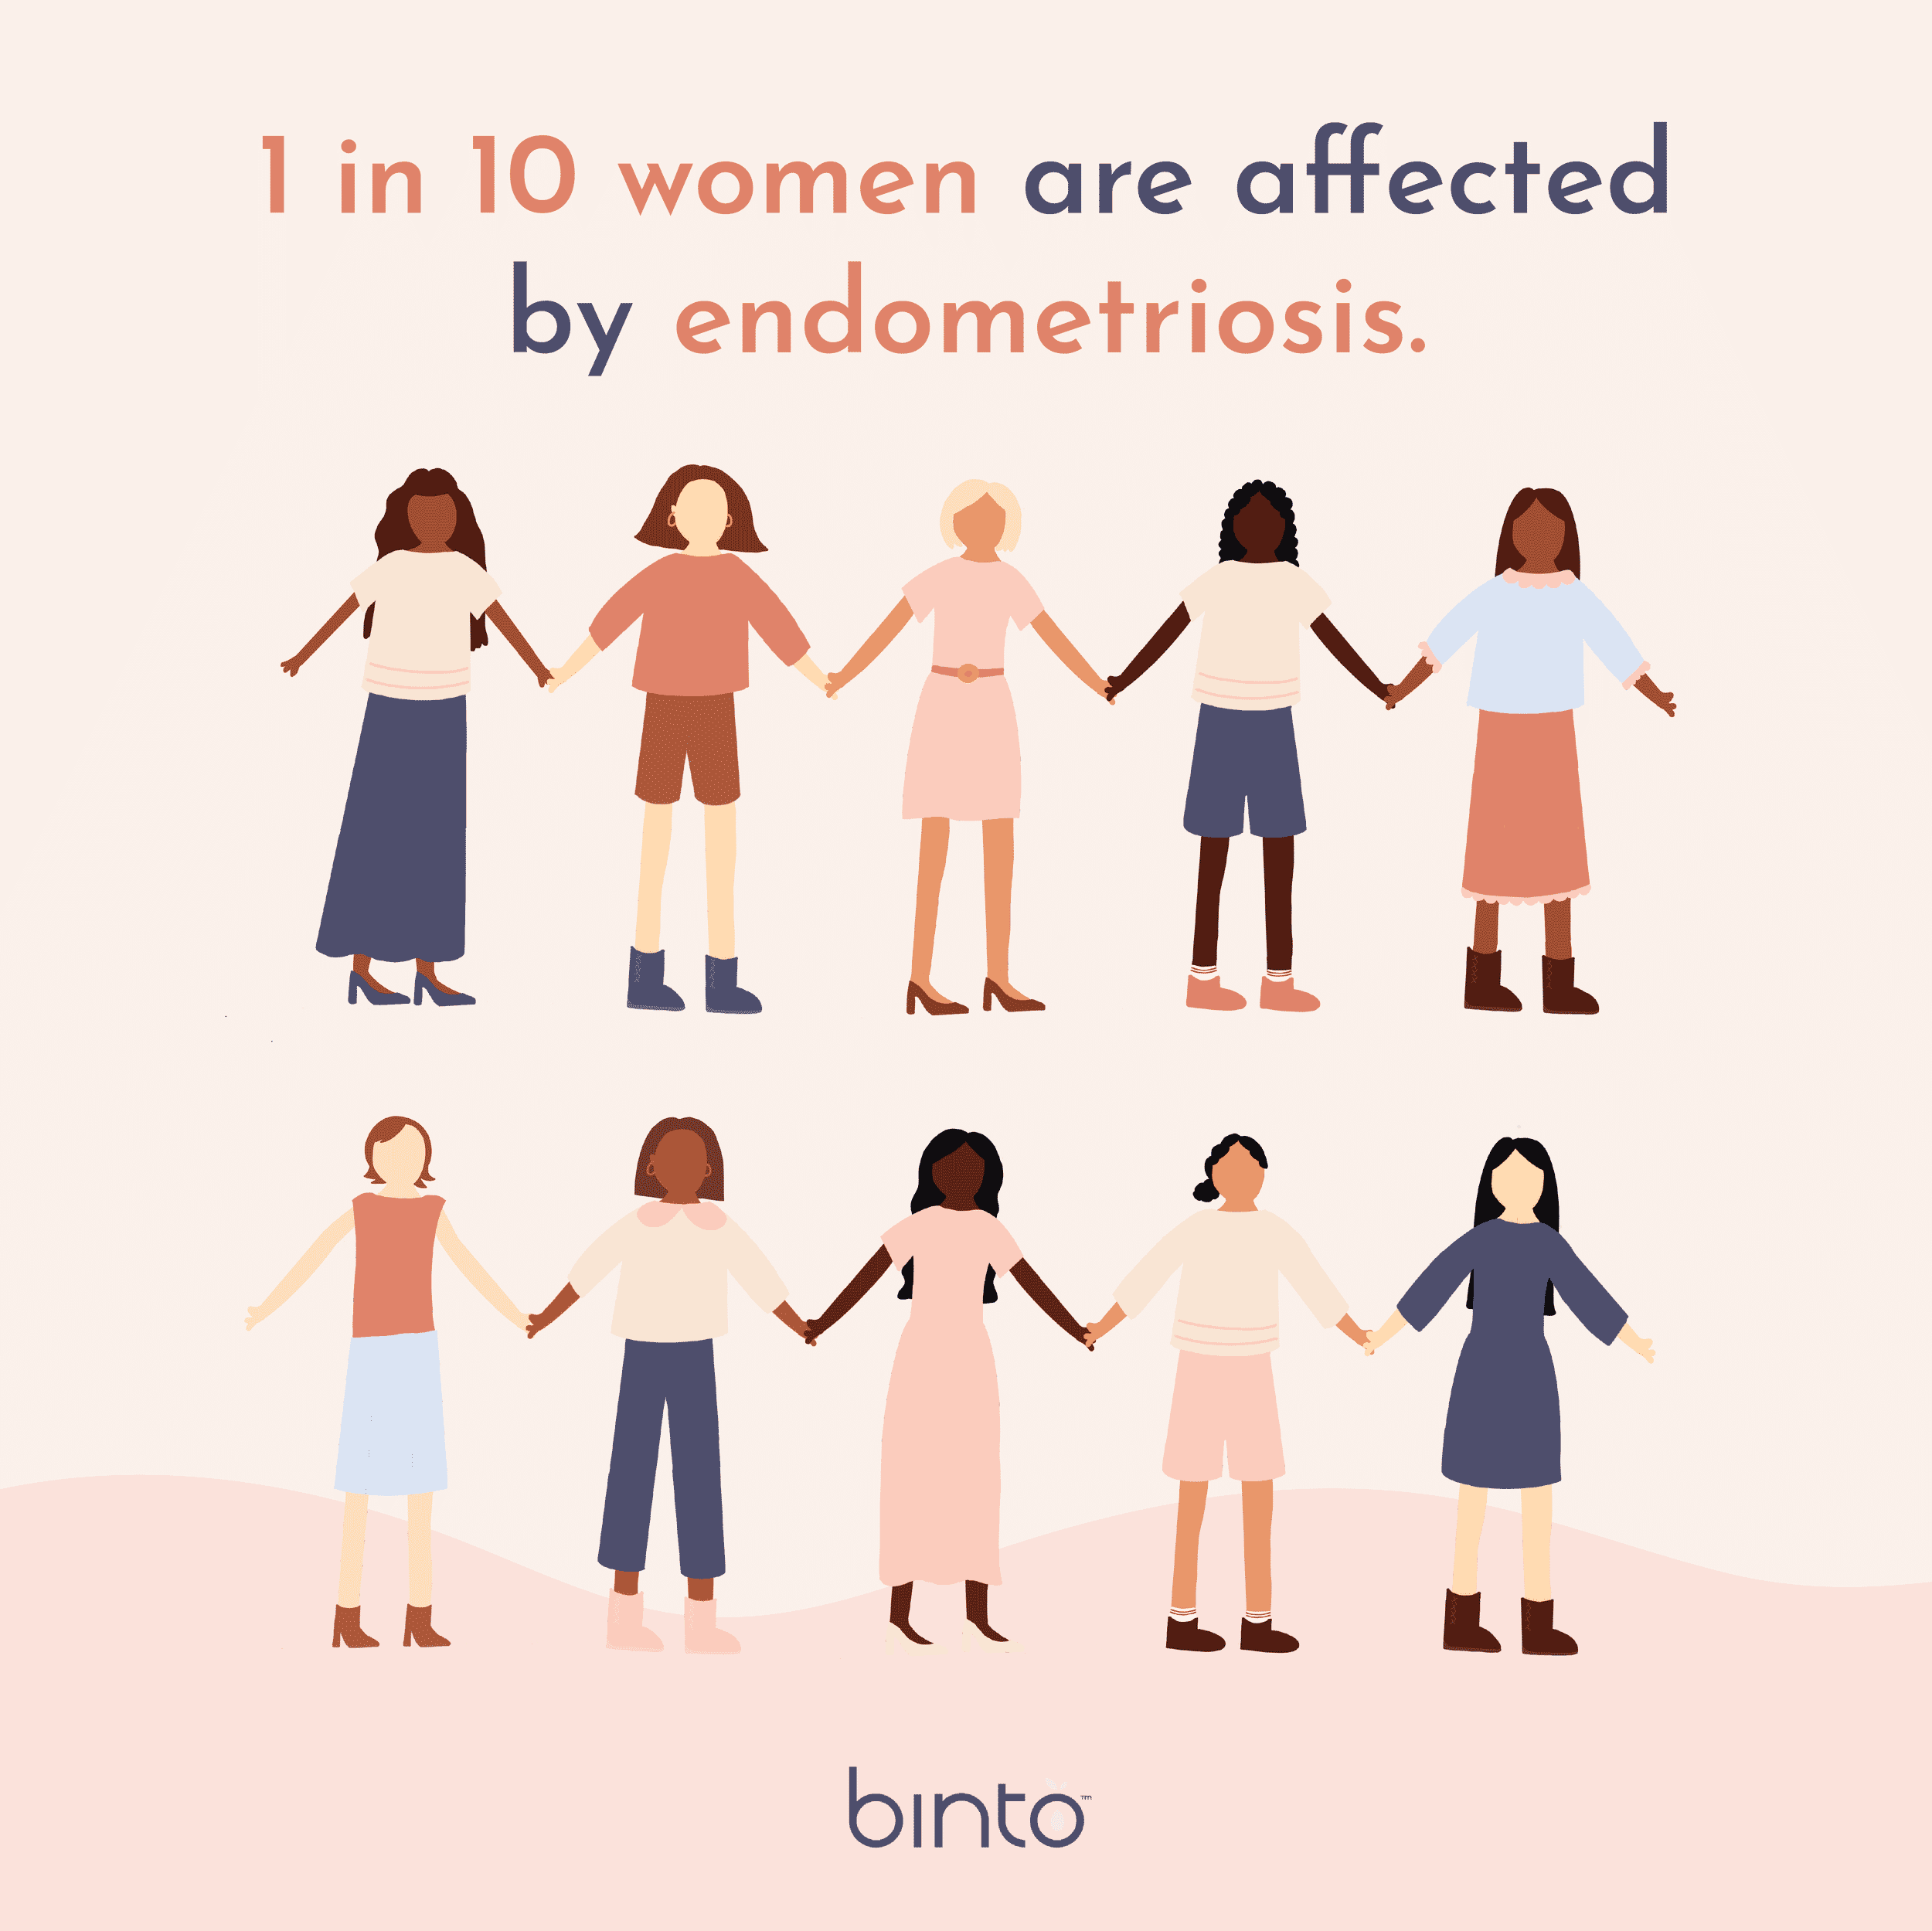 binto graphic that states that 1 in 10 women are affected by endometriosis